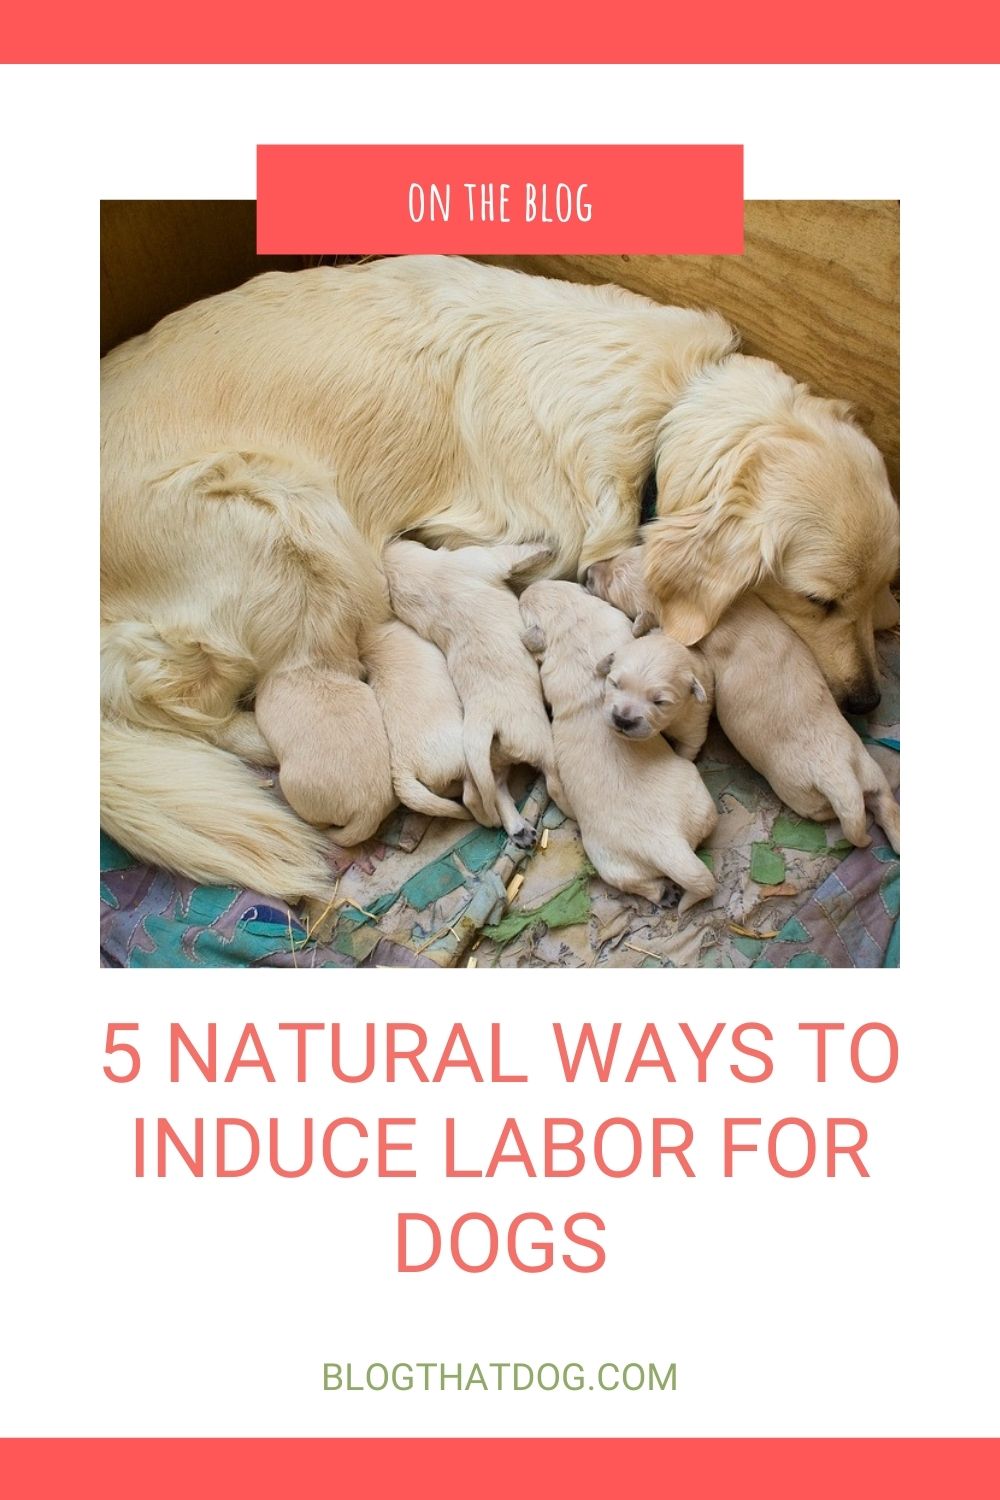 How to induce labor in dogs